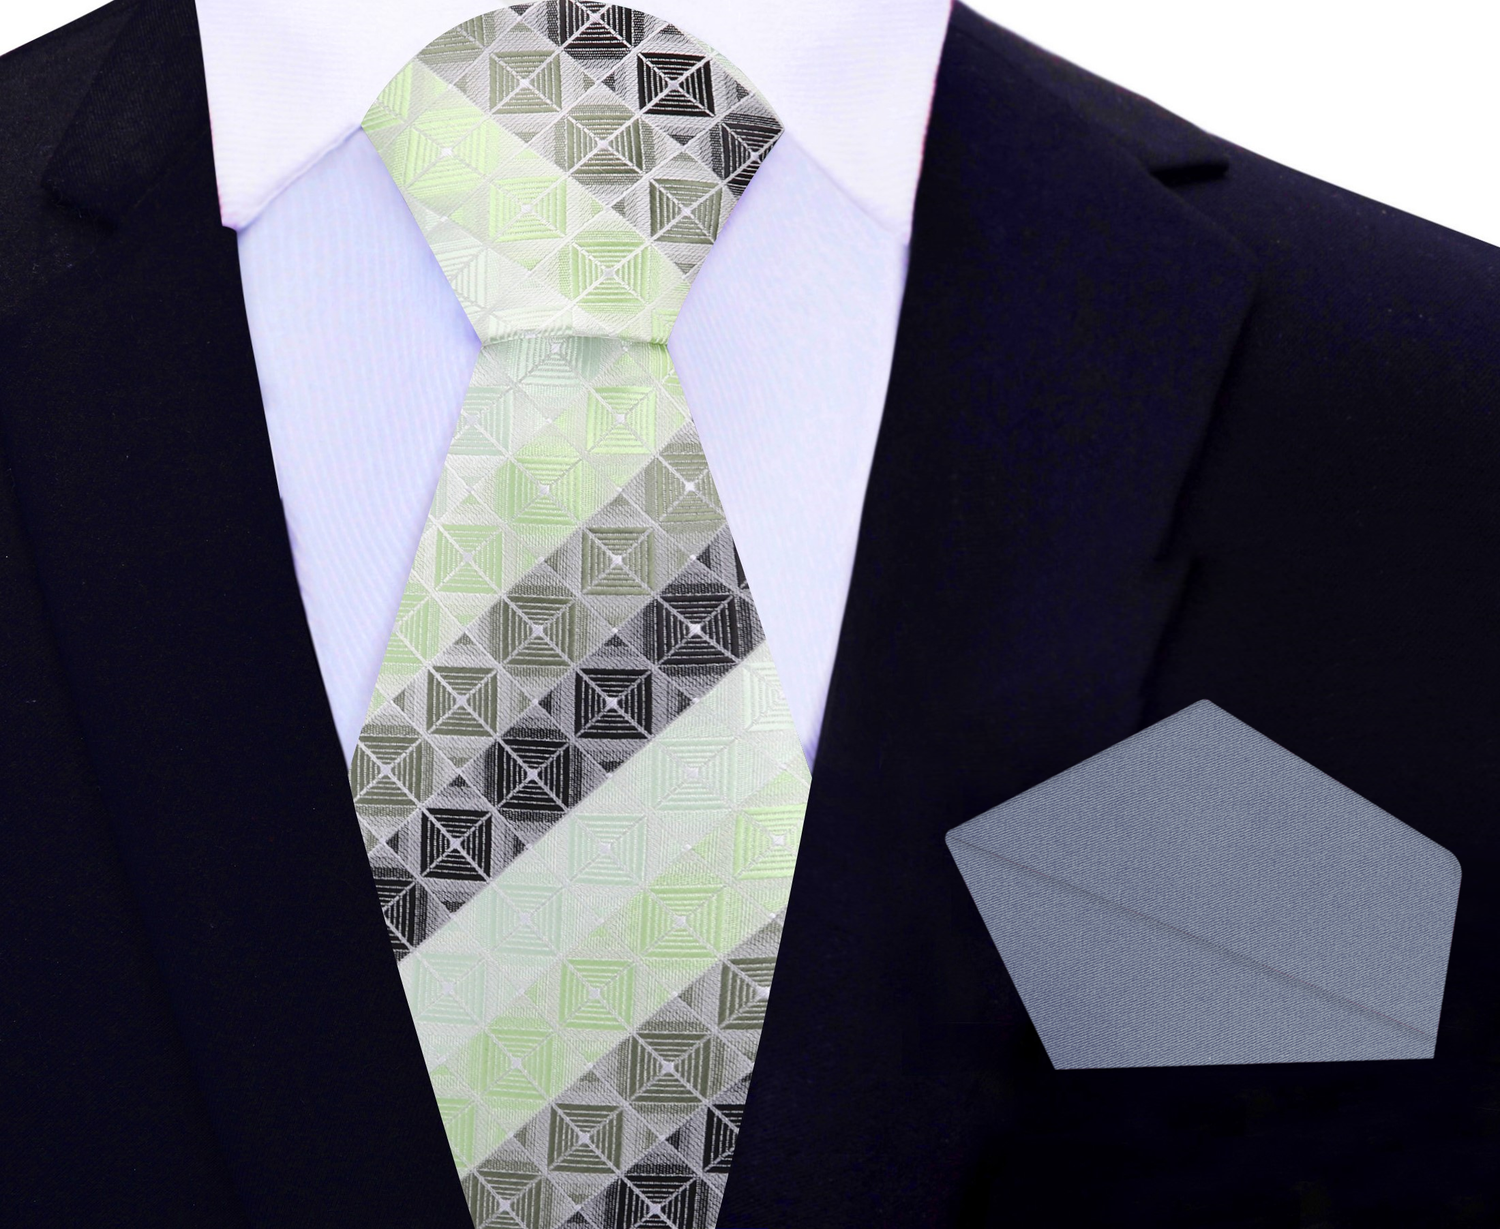 View 2: Green Geometric Blocks Tie and Grey Square